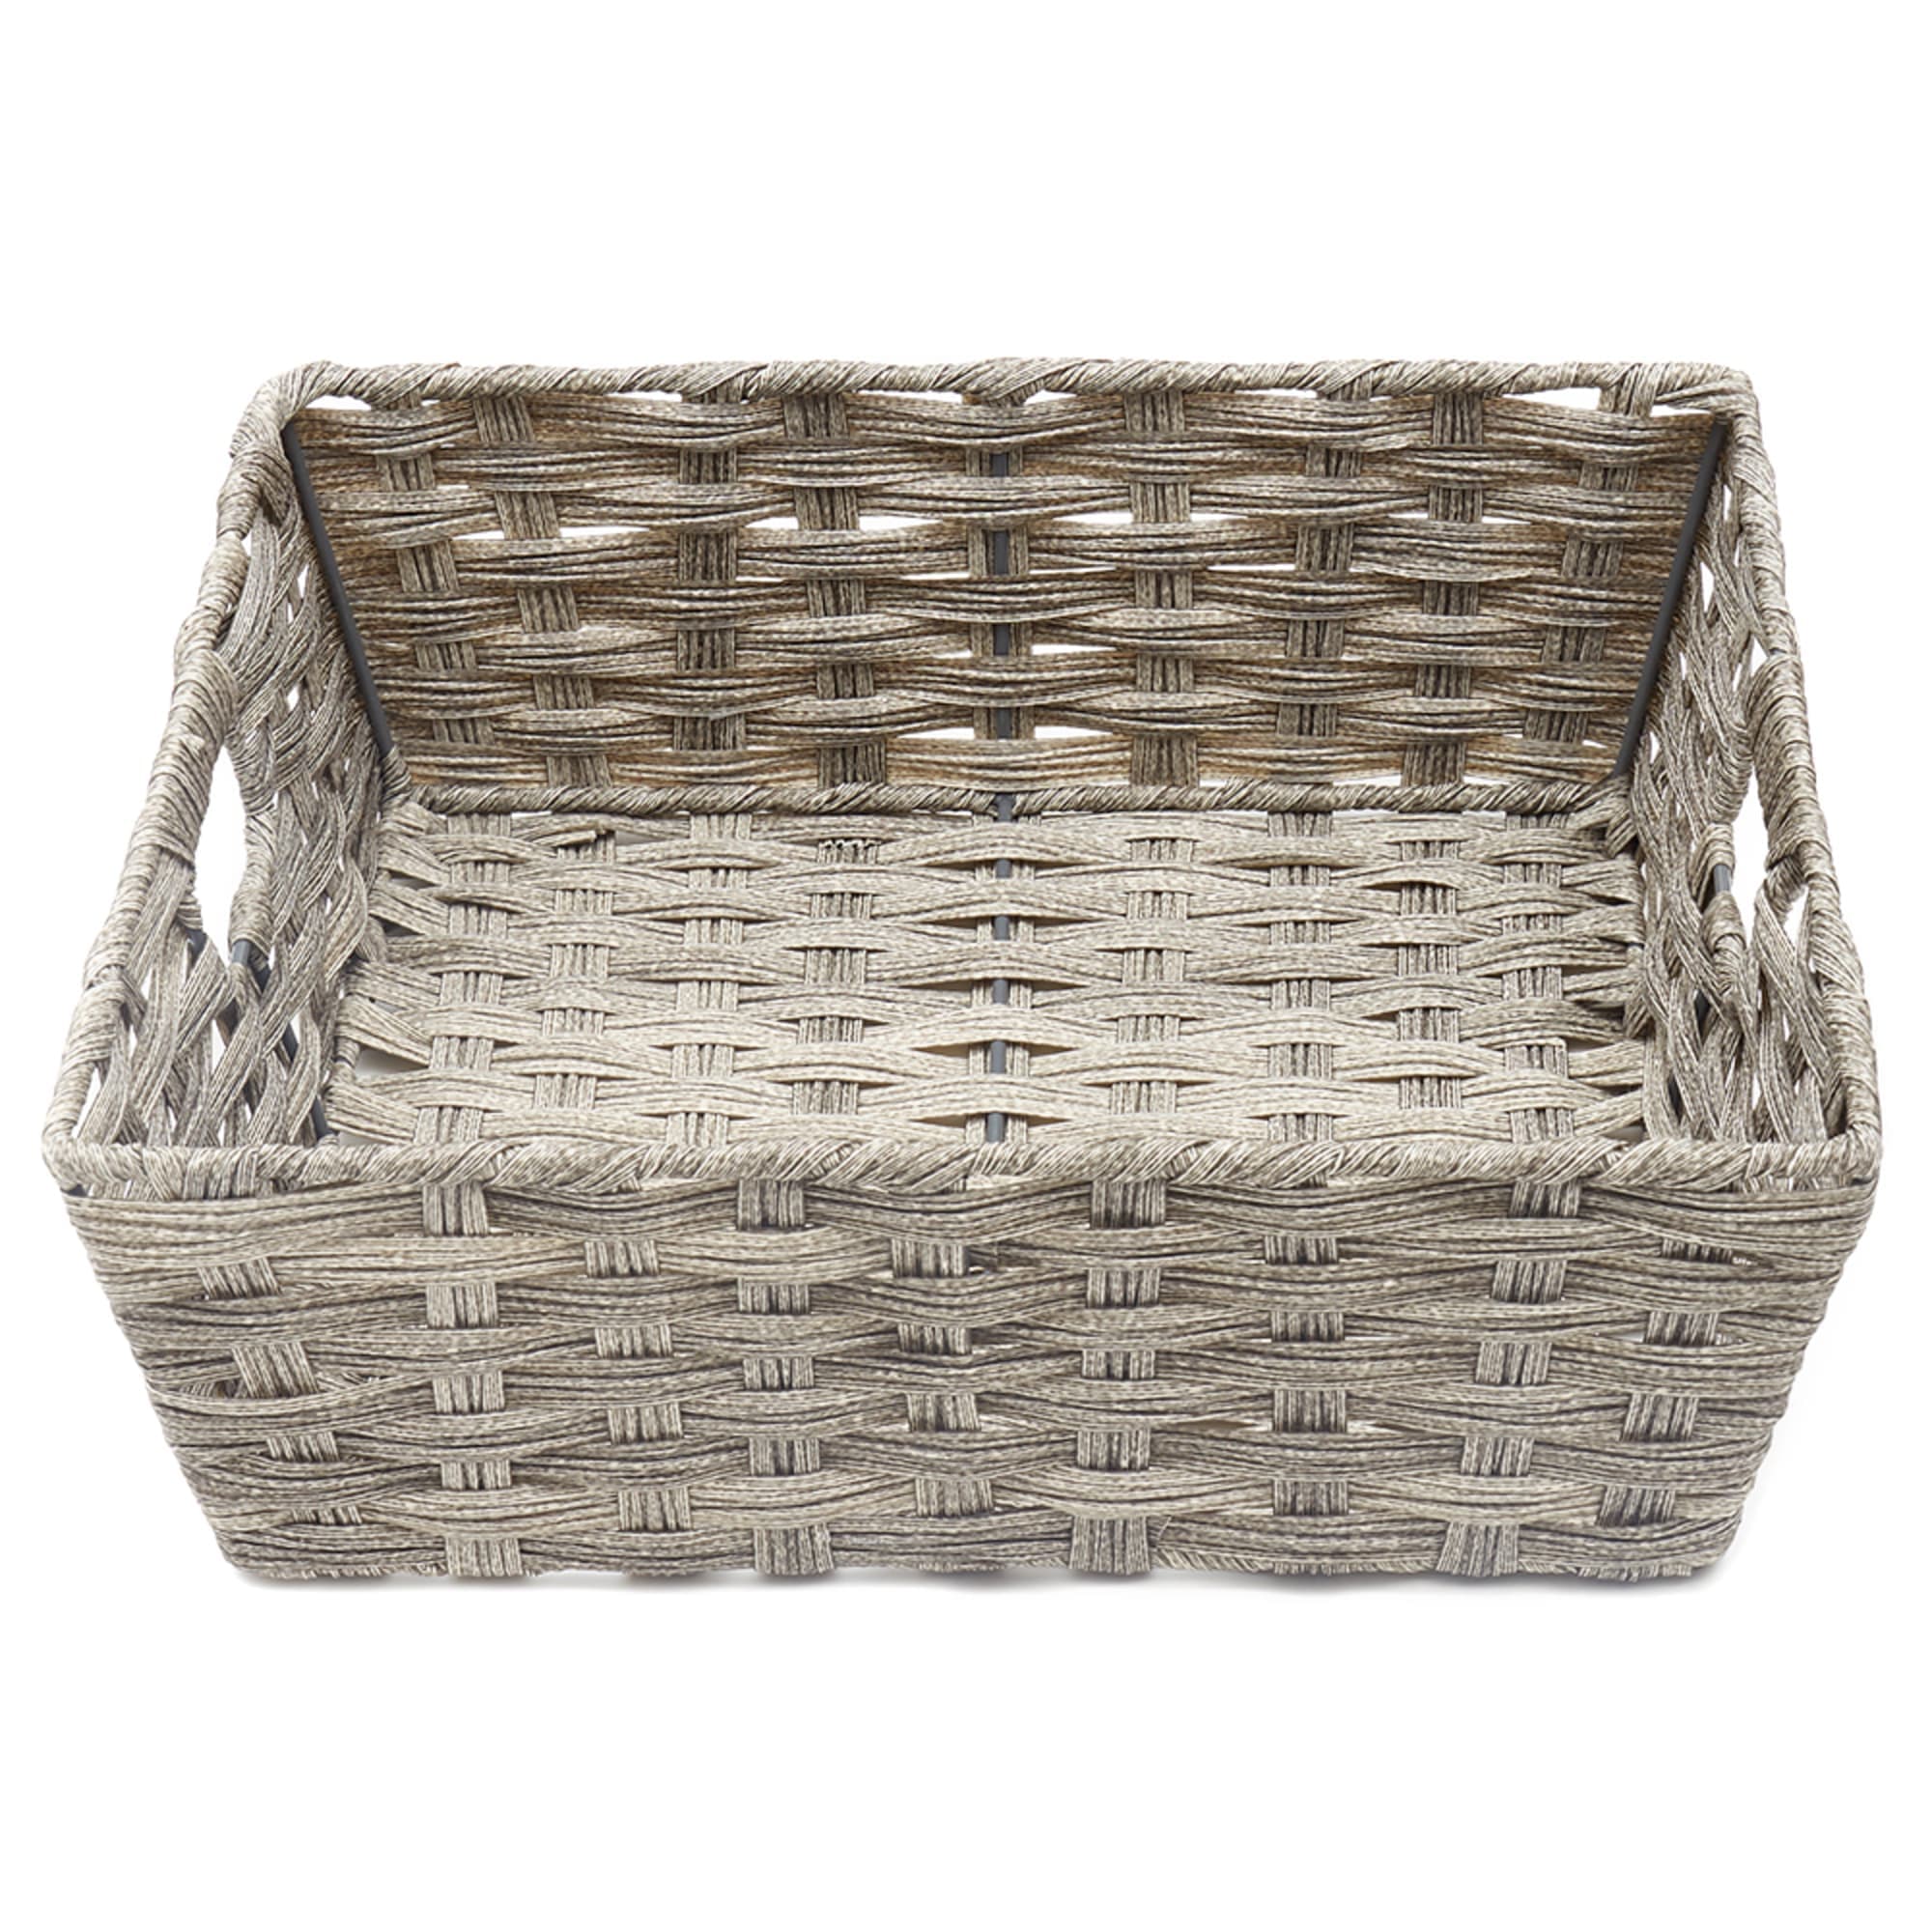 Home Basics Large Faux Rattan Basket with Cut-out Handles, Grey $10.00 EACH, CASE PACK OF 6